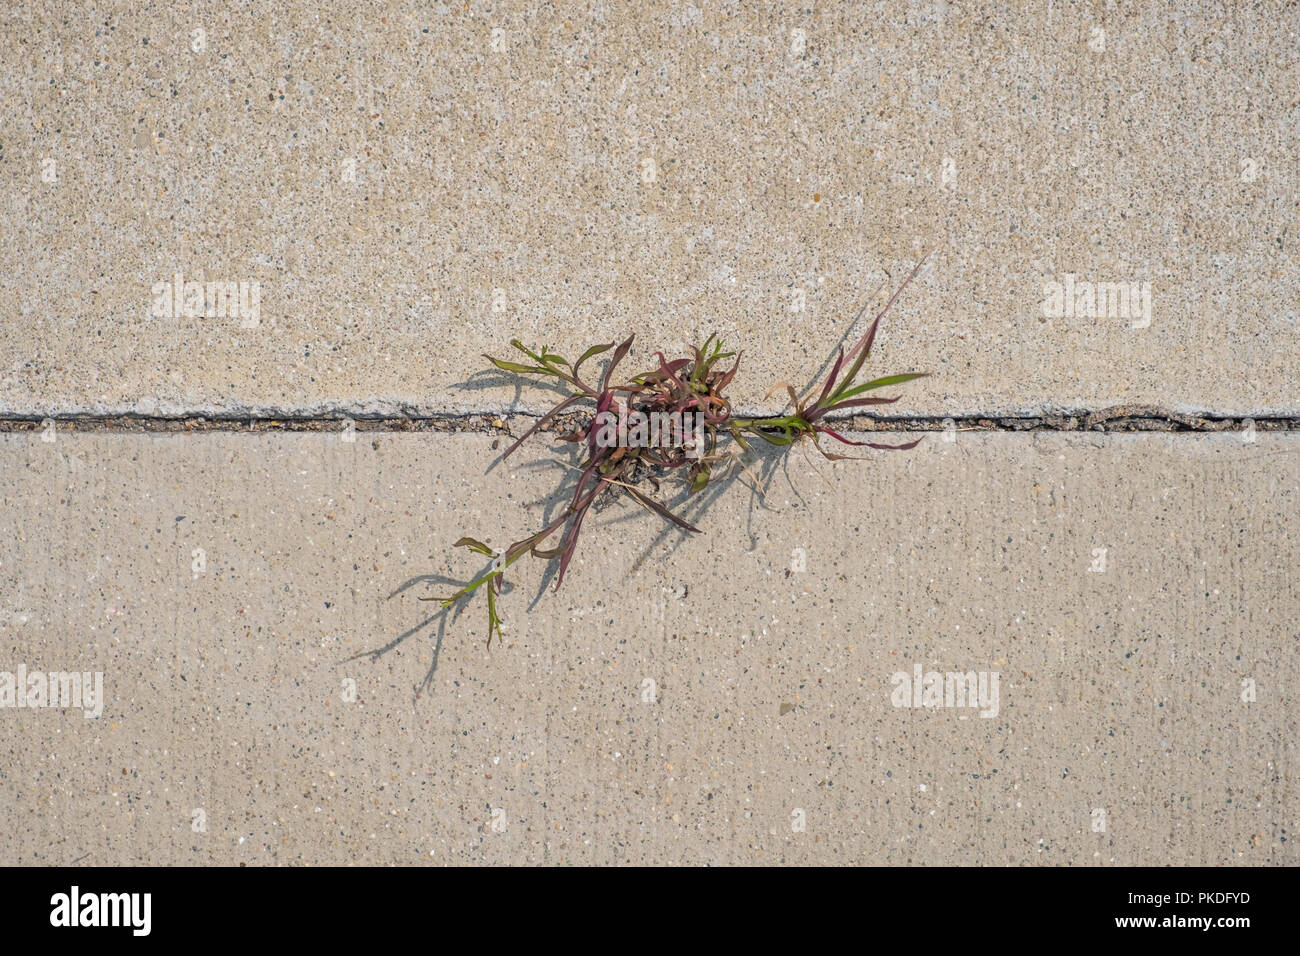 Grass/vegetation growing between two concrete pavement slabs Stock Photo